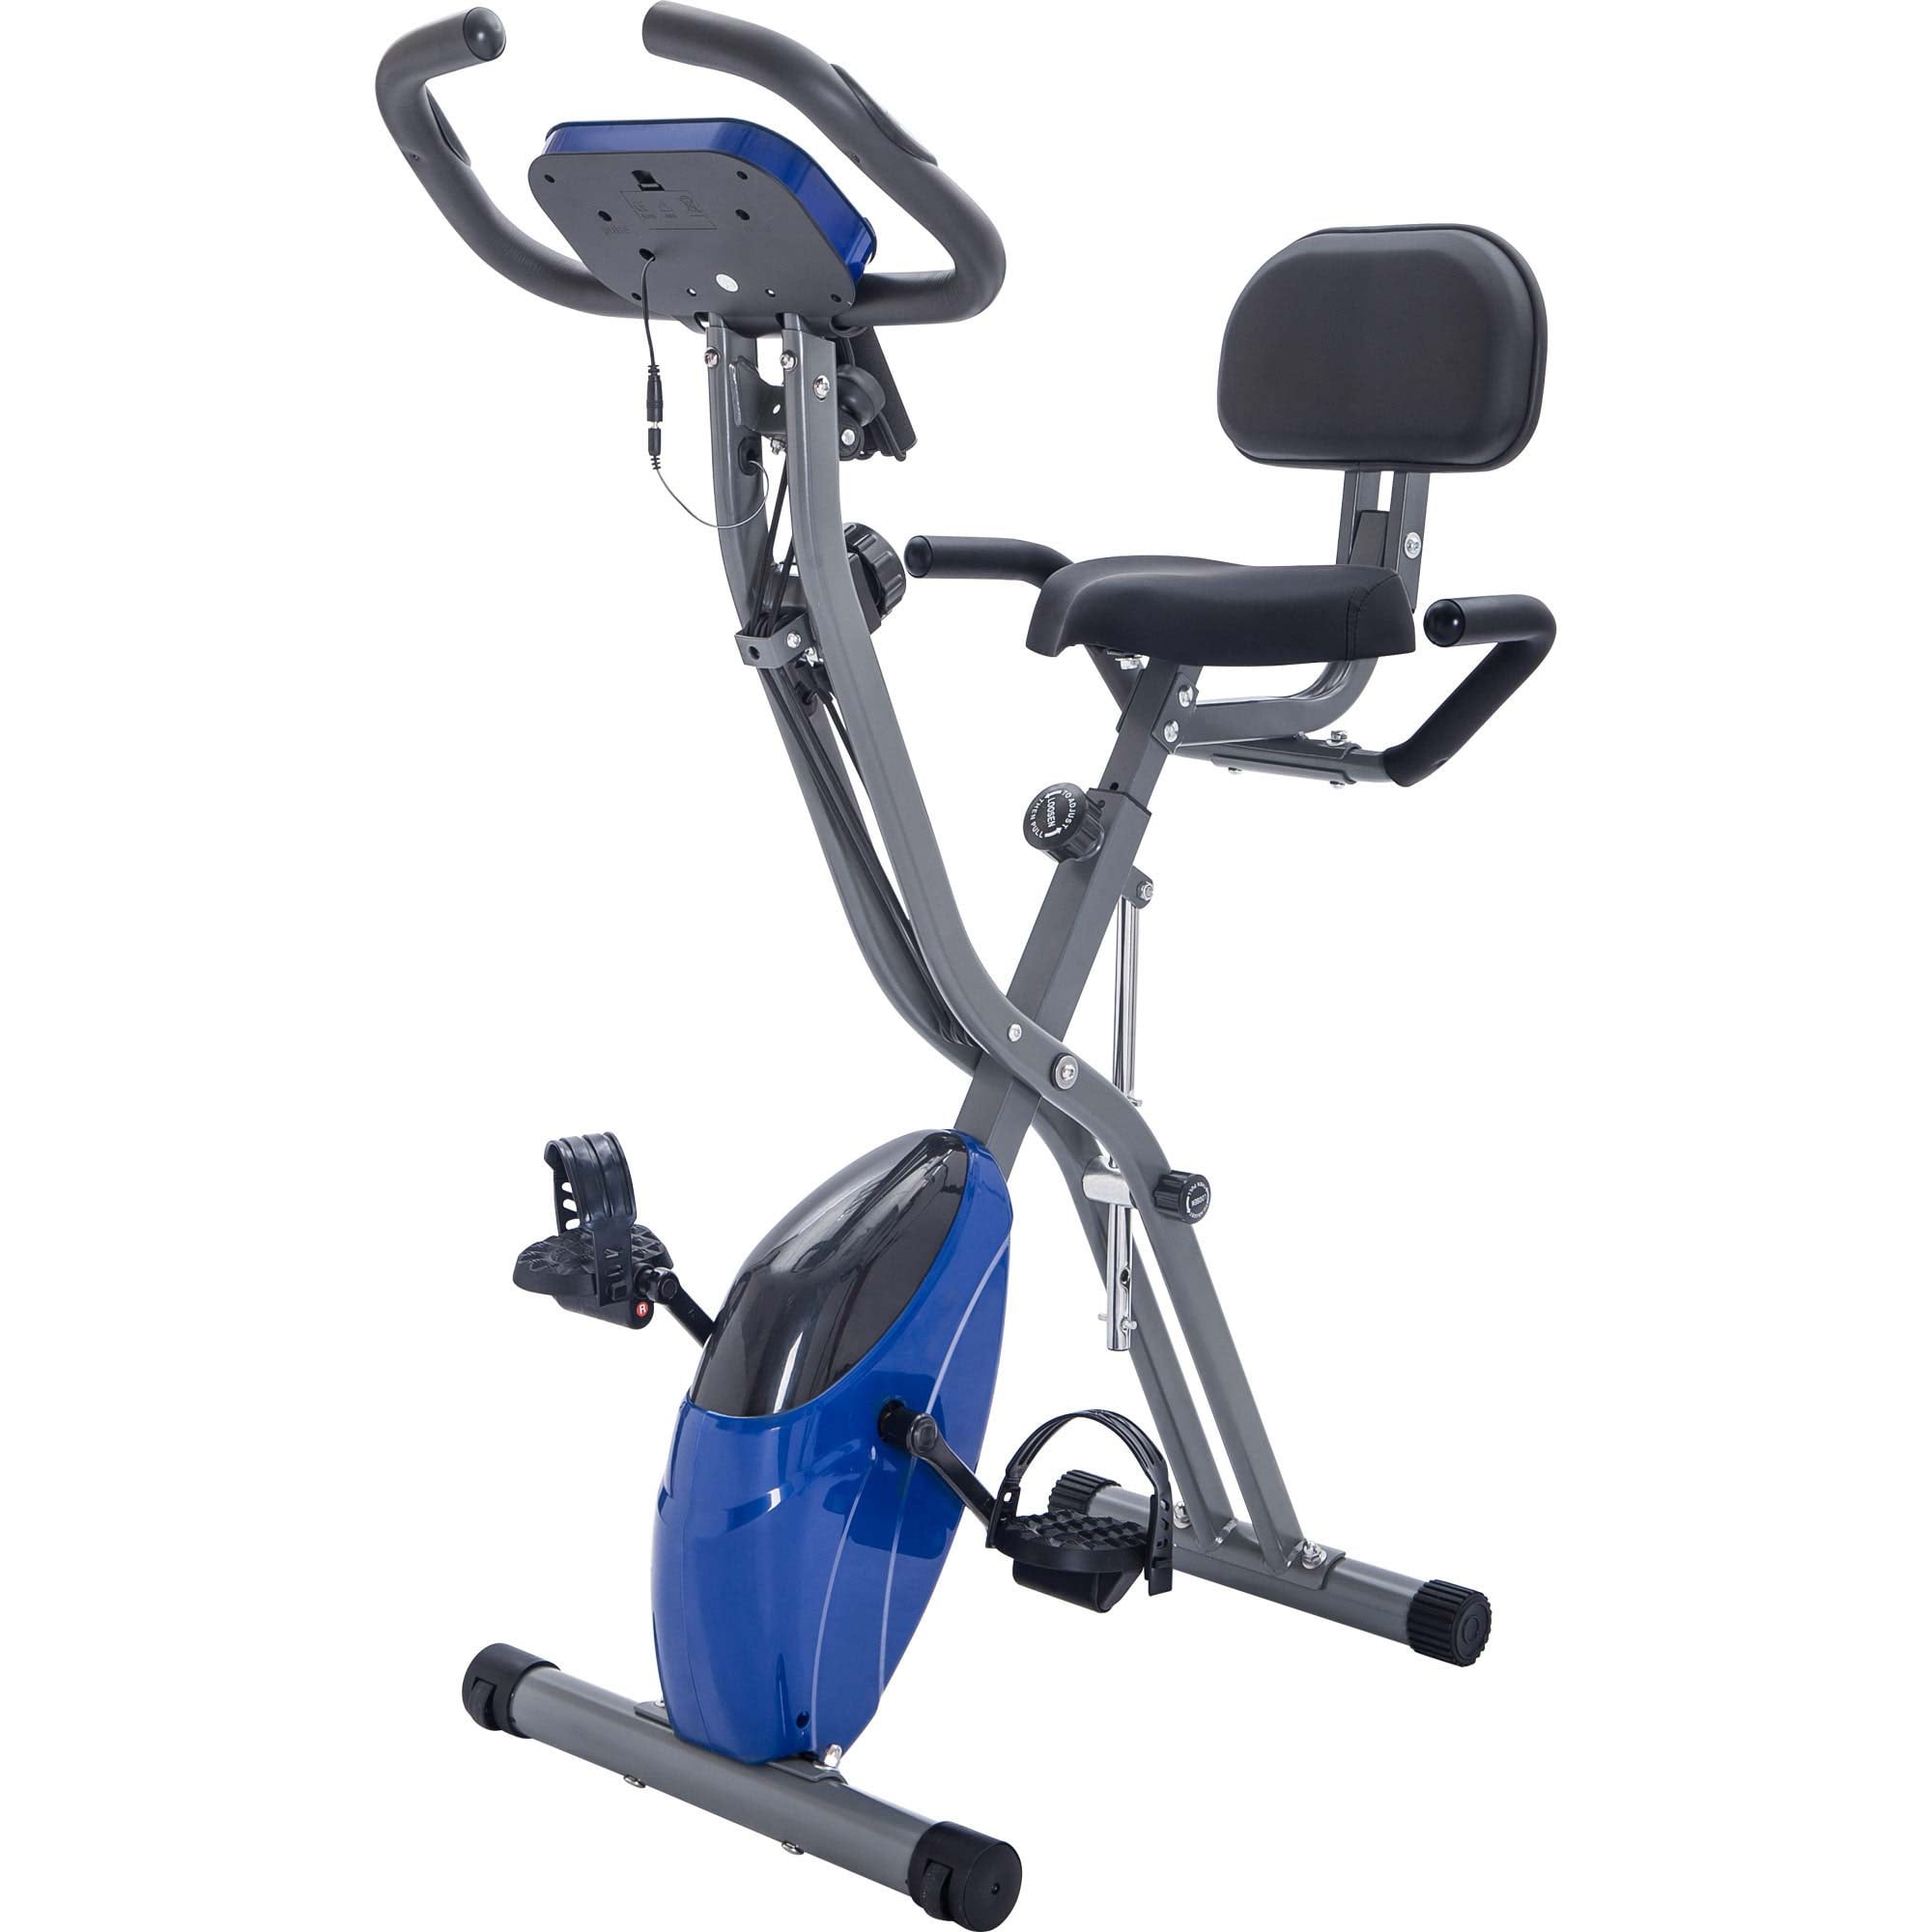 Details about   Home Exercise Bike Gym Pedal Cycling Cardio Arms Legs Training Tool Adjustable 